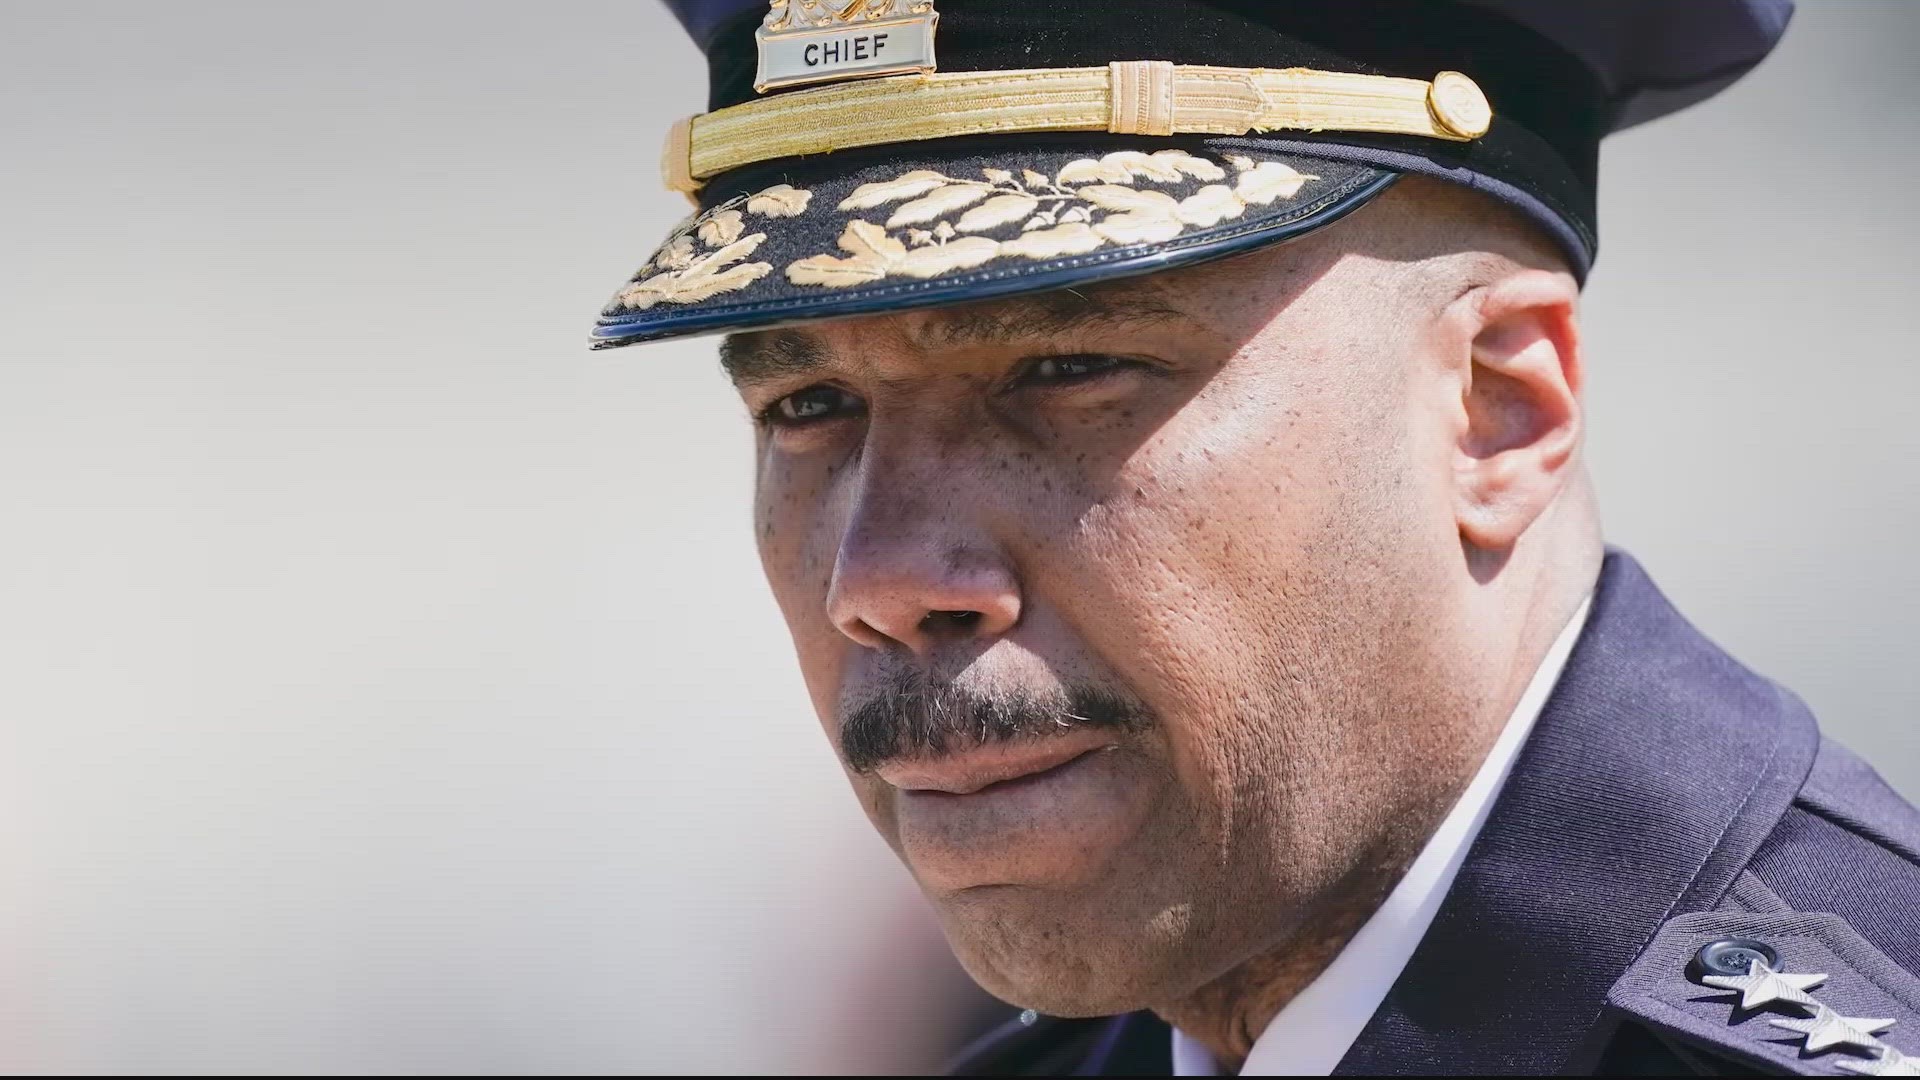 DC Police Chief Robert Contee is leaving the department to become an Assistant Director at the FBI. Our Delia Goncalves spoke with two sources to get this confirmed.